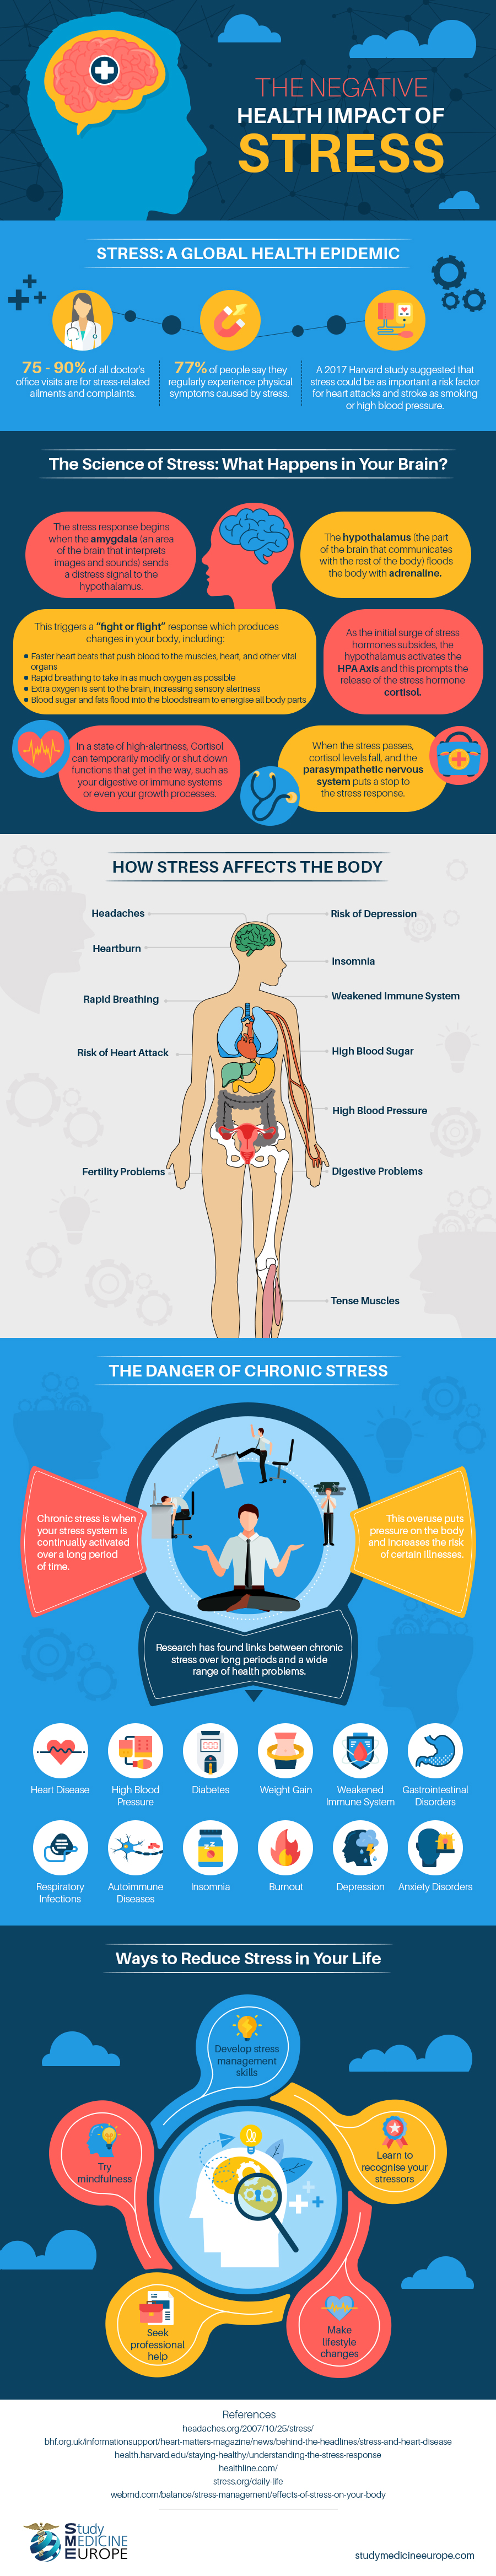 The Negative Health Impact of Stress